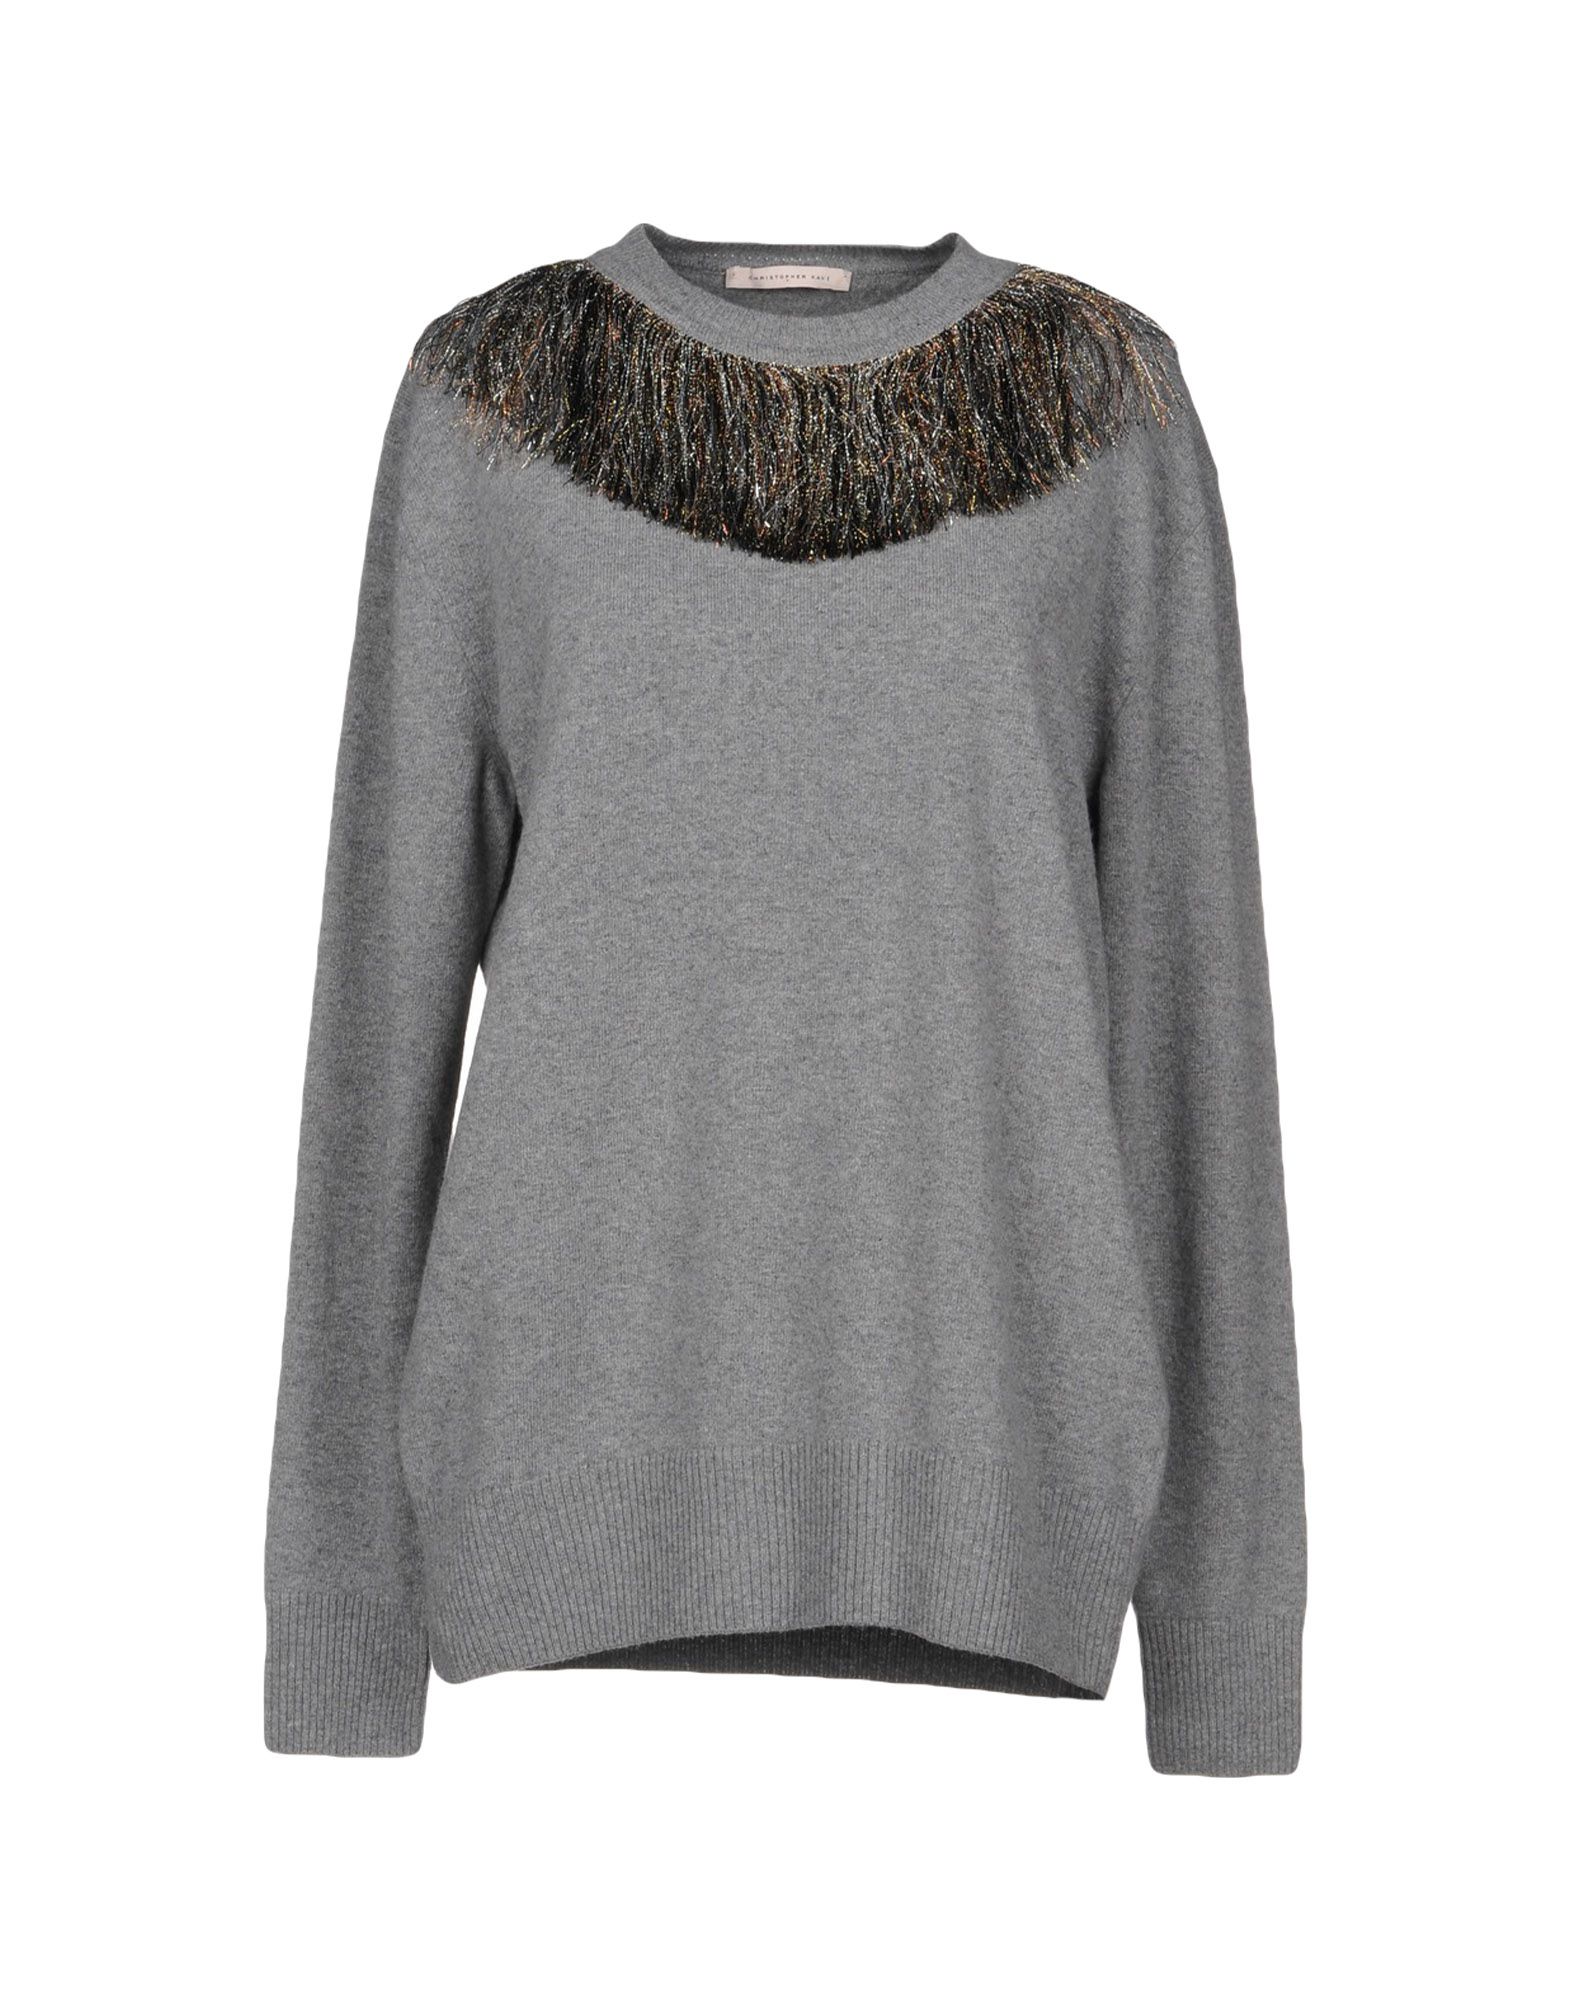 CHRISTOPHER KANE SWEATERS,39861285FN 4